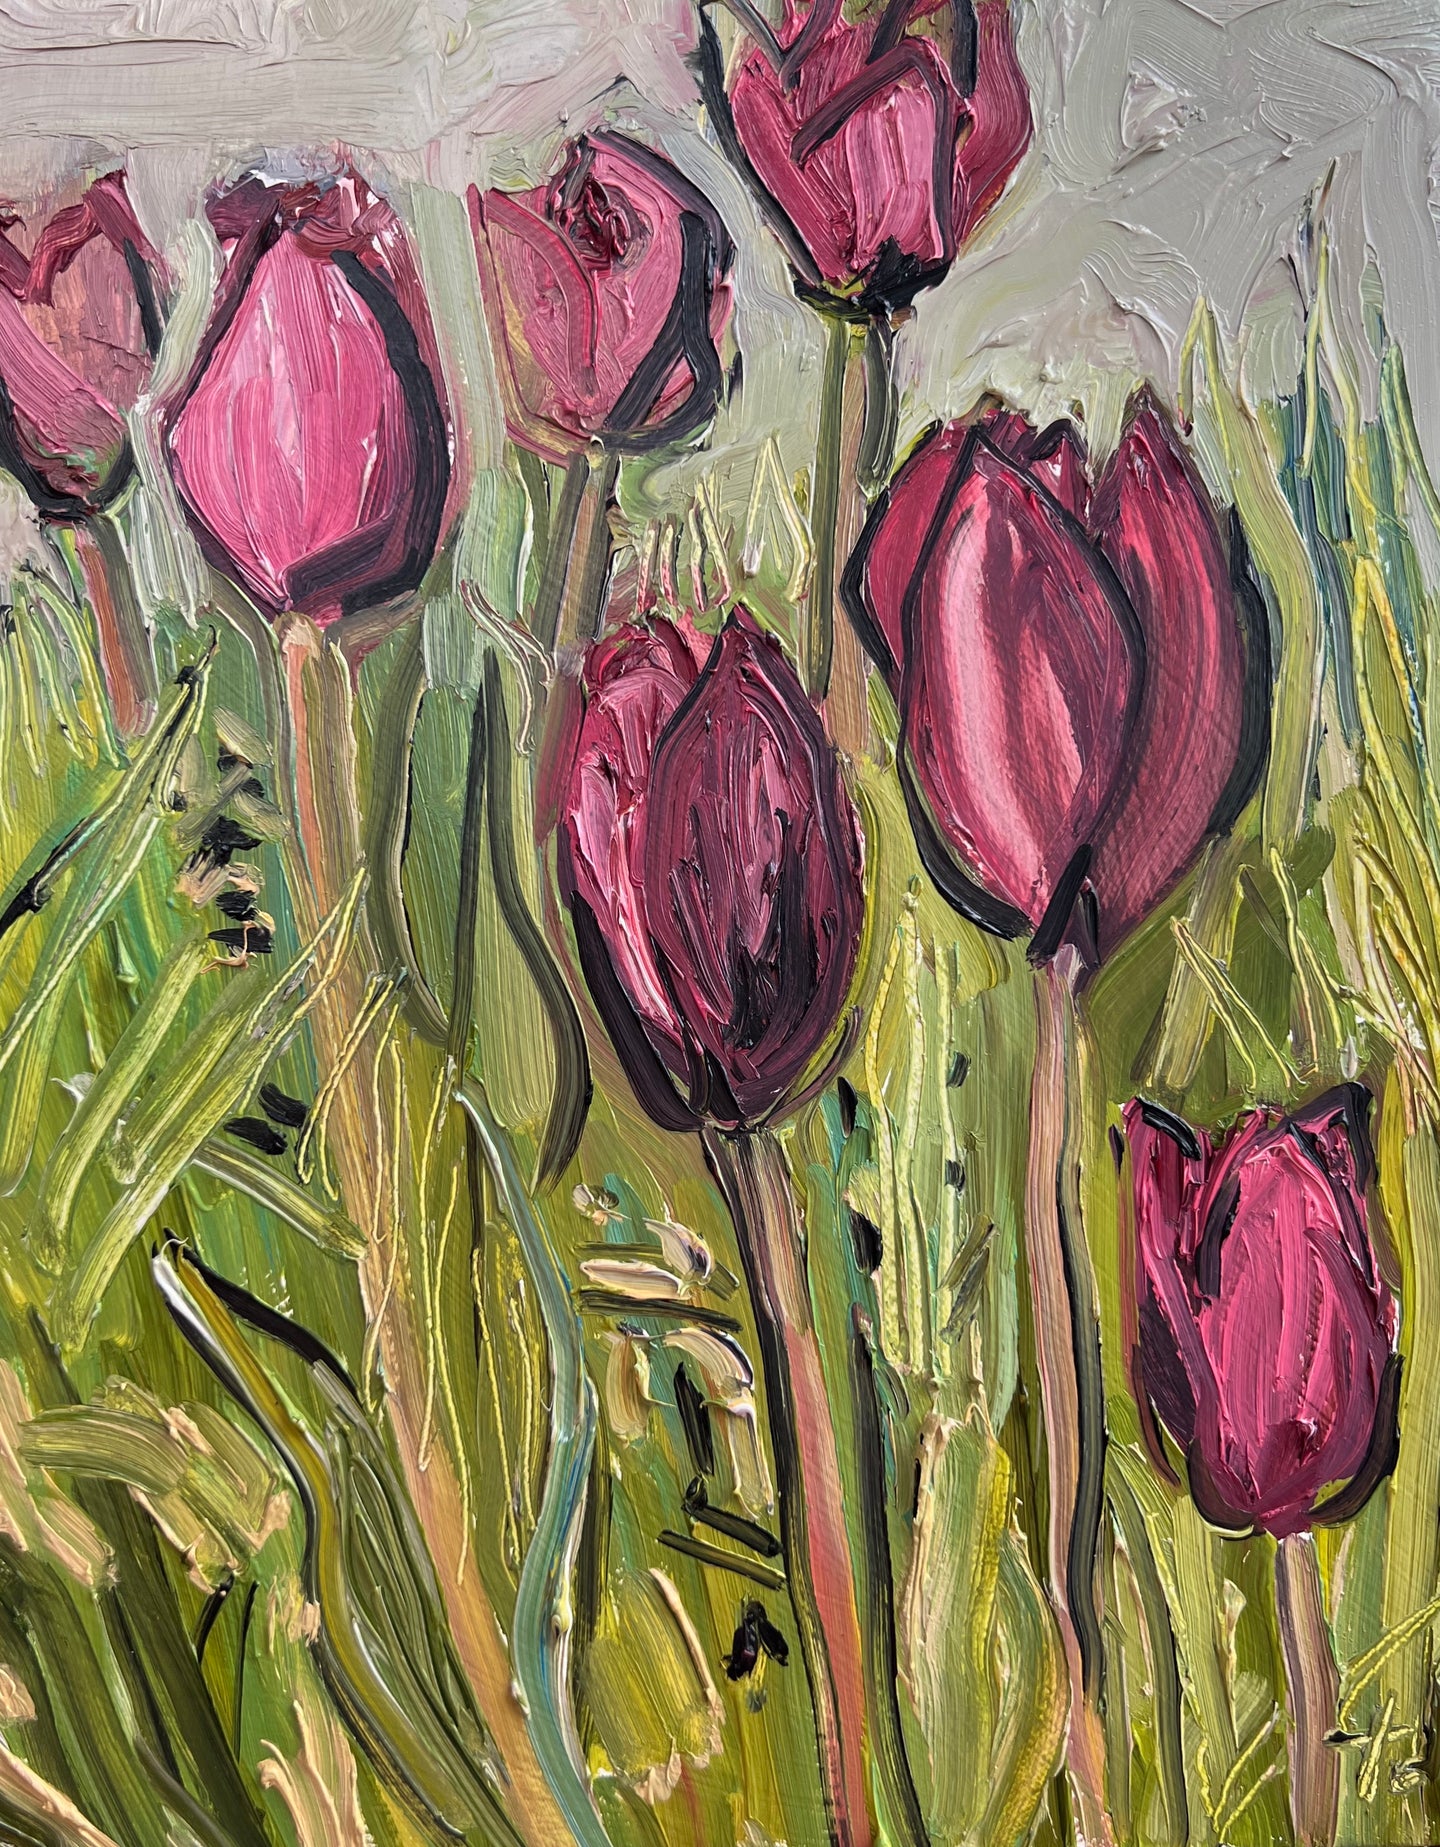 Tulips in the Grass